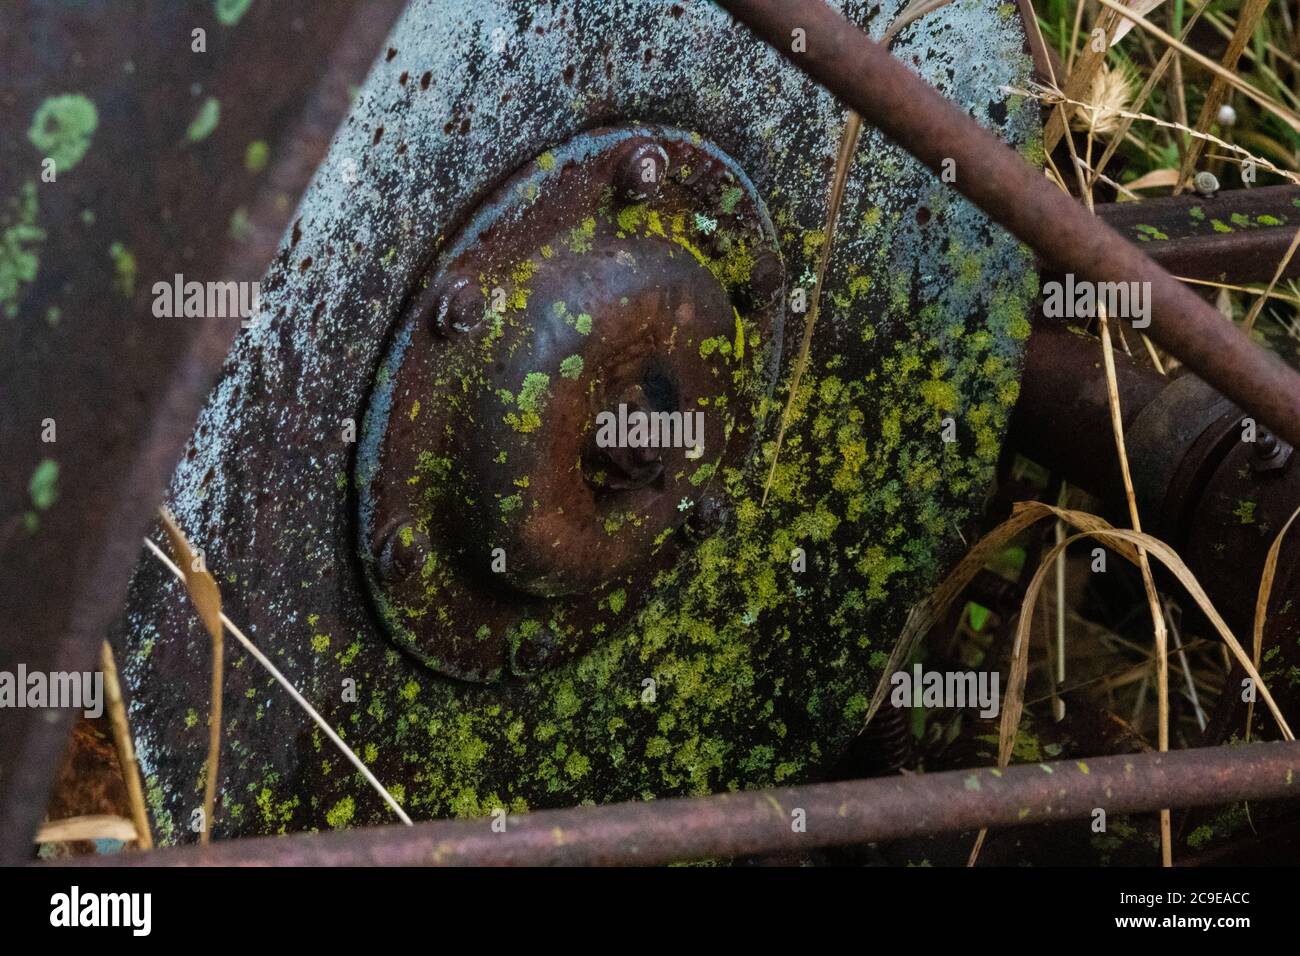 old abandoned Antique rusted farm equipment left in a field covered in moss. A remnant of past times and life before modern technology. Stock Photo